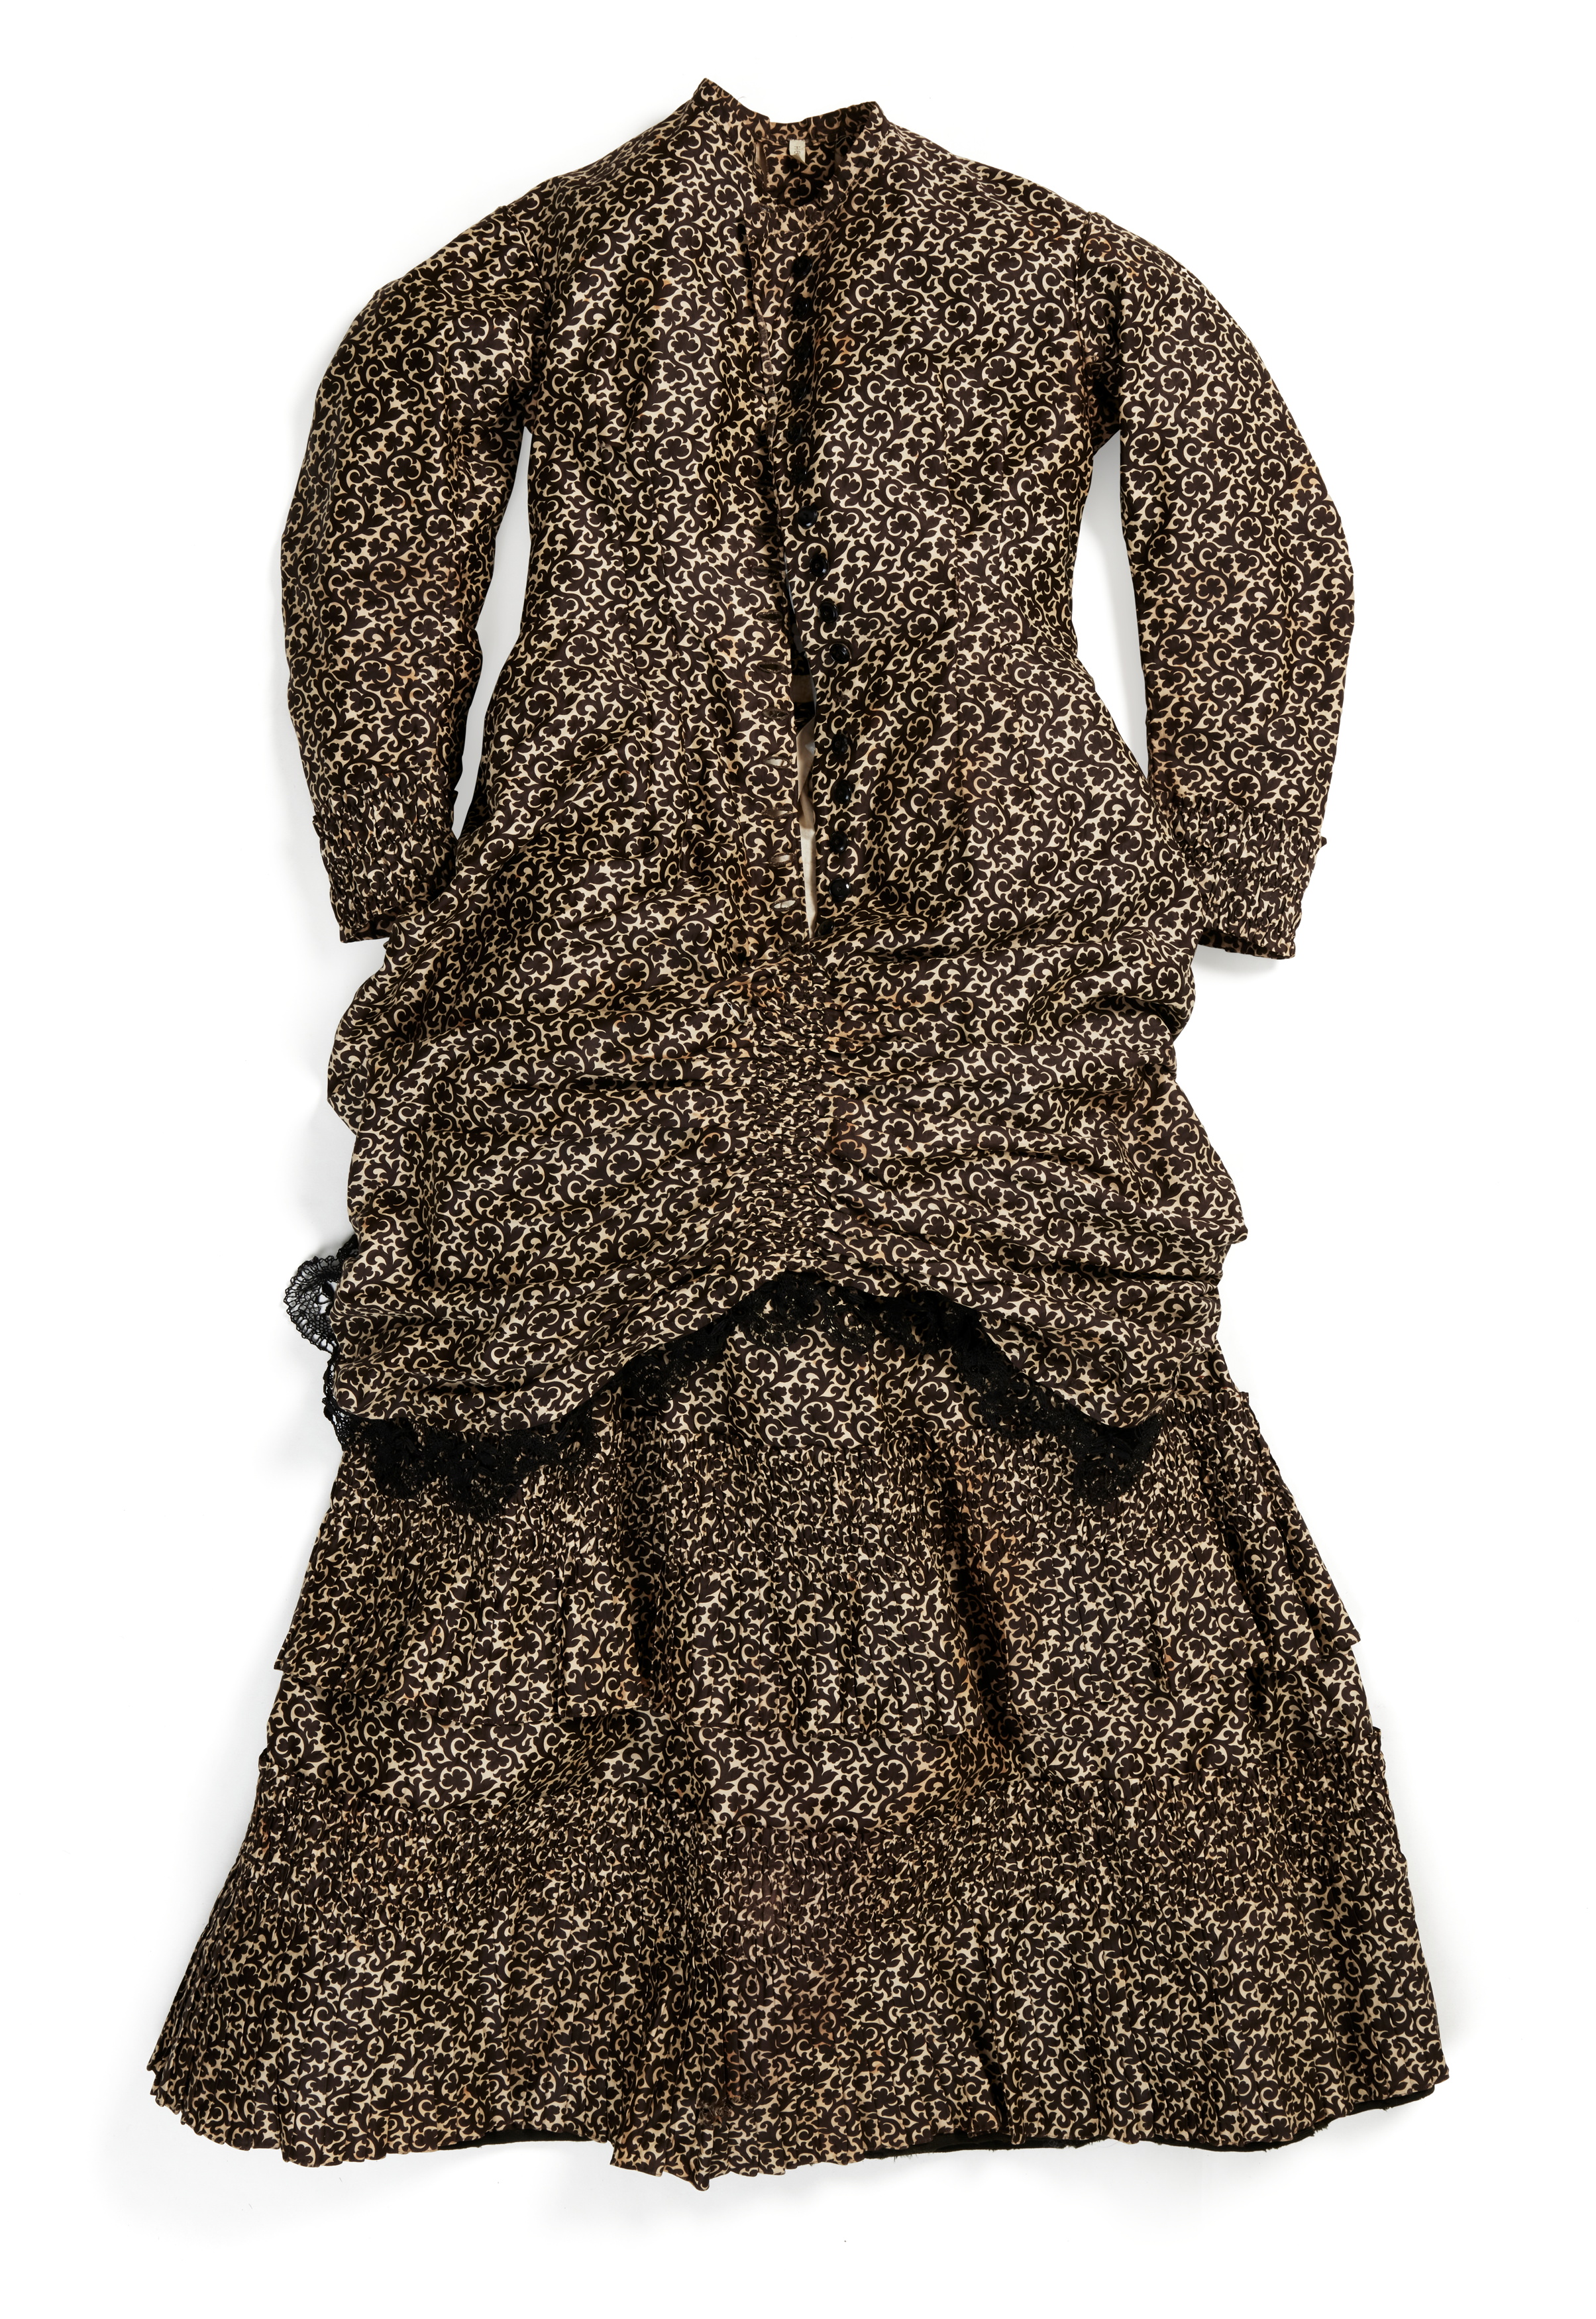 Mid 19th century day dress with bustle